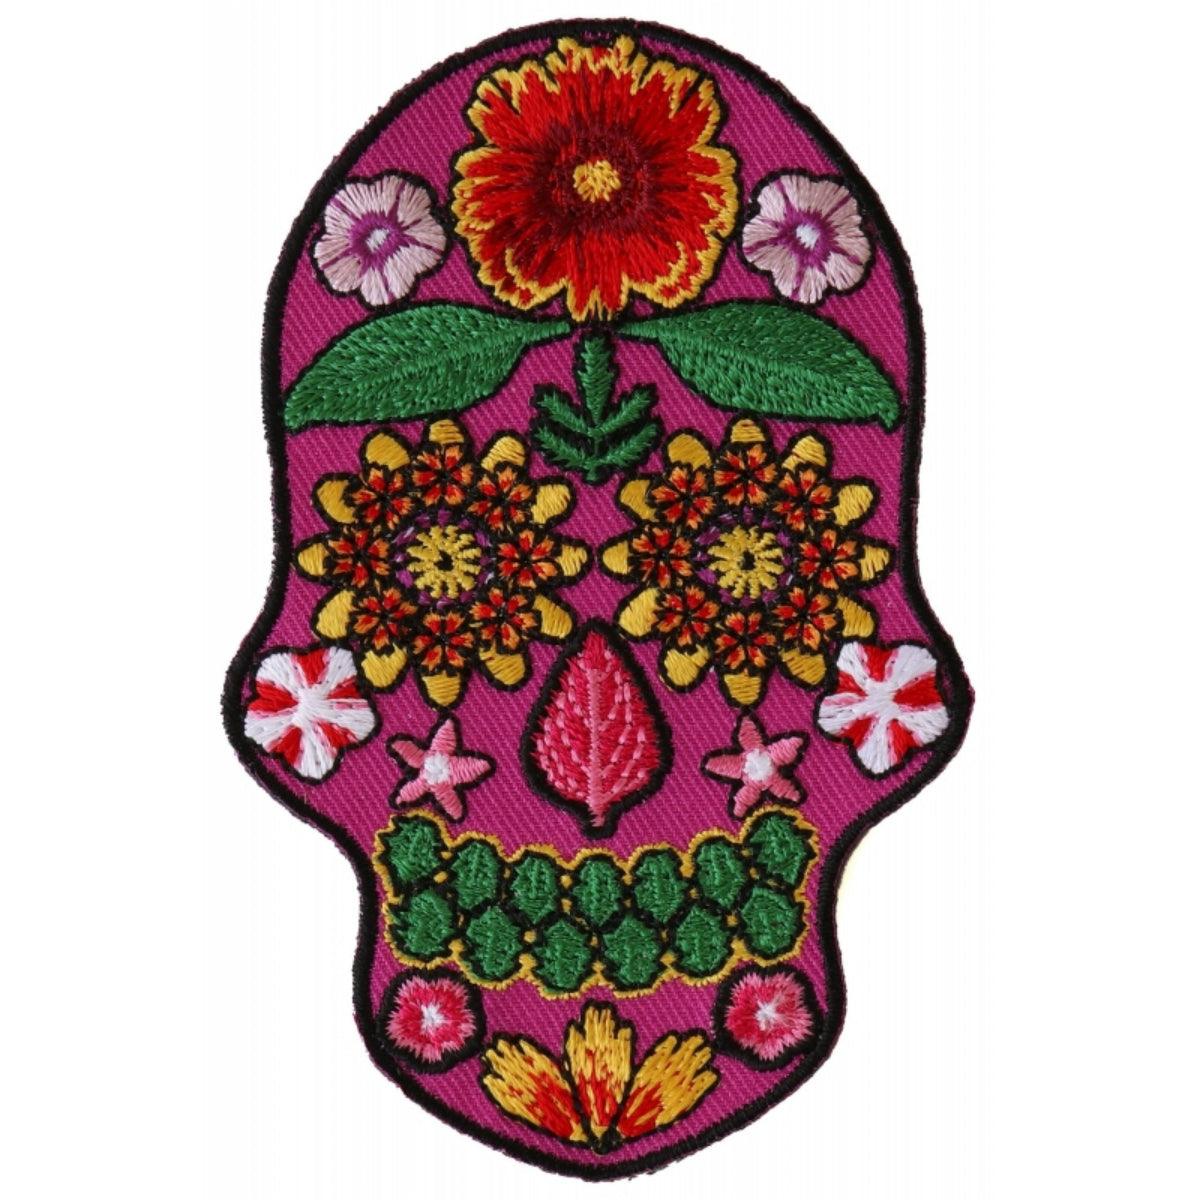 Daniel Smart Flower Skull Embroidered Iron on Patch, Pink, 2.6 x 4 inches - American Legend Rider